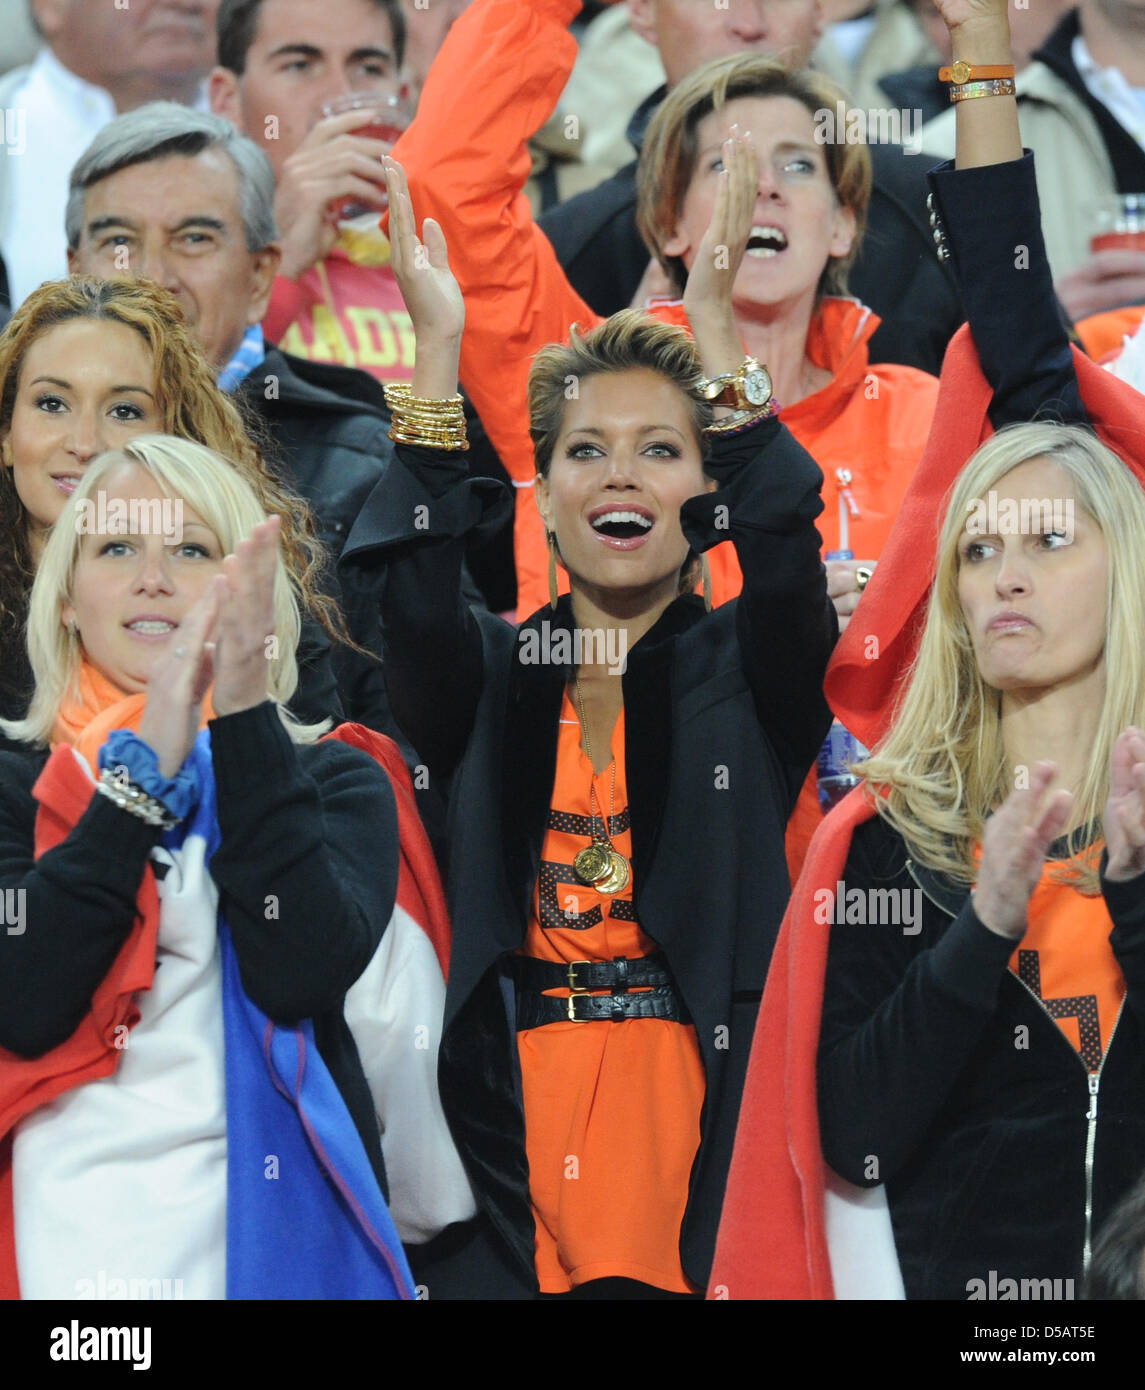 Bouchra van Persie (L-R), wife of Dutch player Robin van Persie, Bernadien Robben, wife of Dutch player Arjen Robben, Sylvie van der Vaart, wife of Dutch player Rafael van der Vaart, and Andra van Bommel, wife of Dutch player Mark van Bommel on the stand prior to the 2010 FIFA World Cup final match between the Netherlands and Spain at Soccer City Stadium in Johannesburg, South Afri Stock Photo